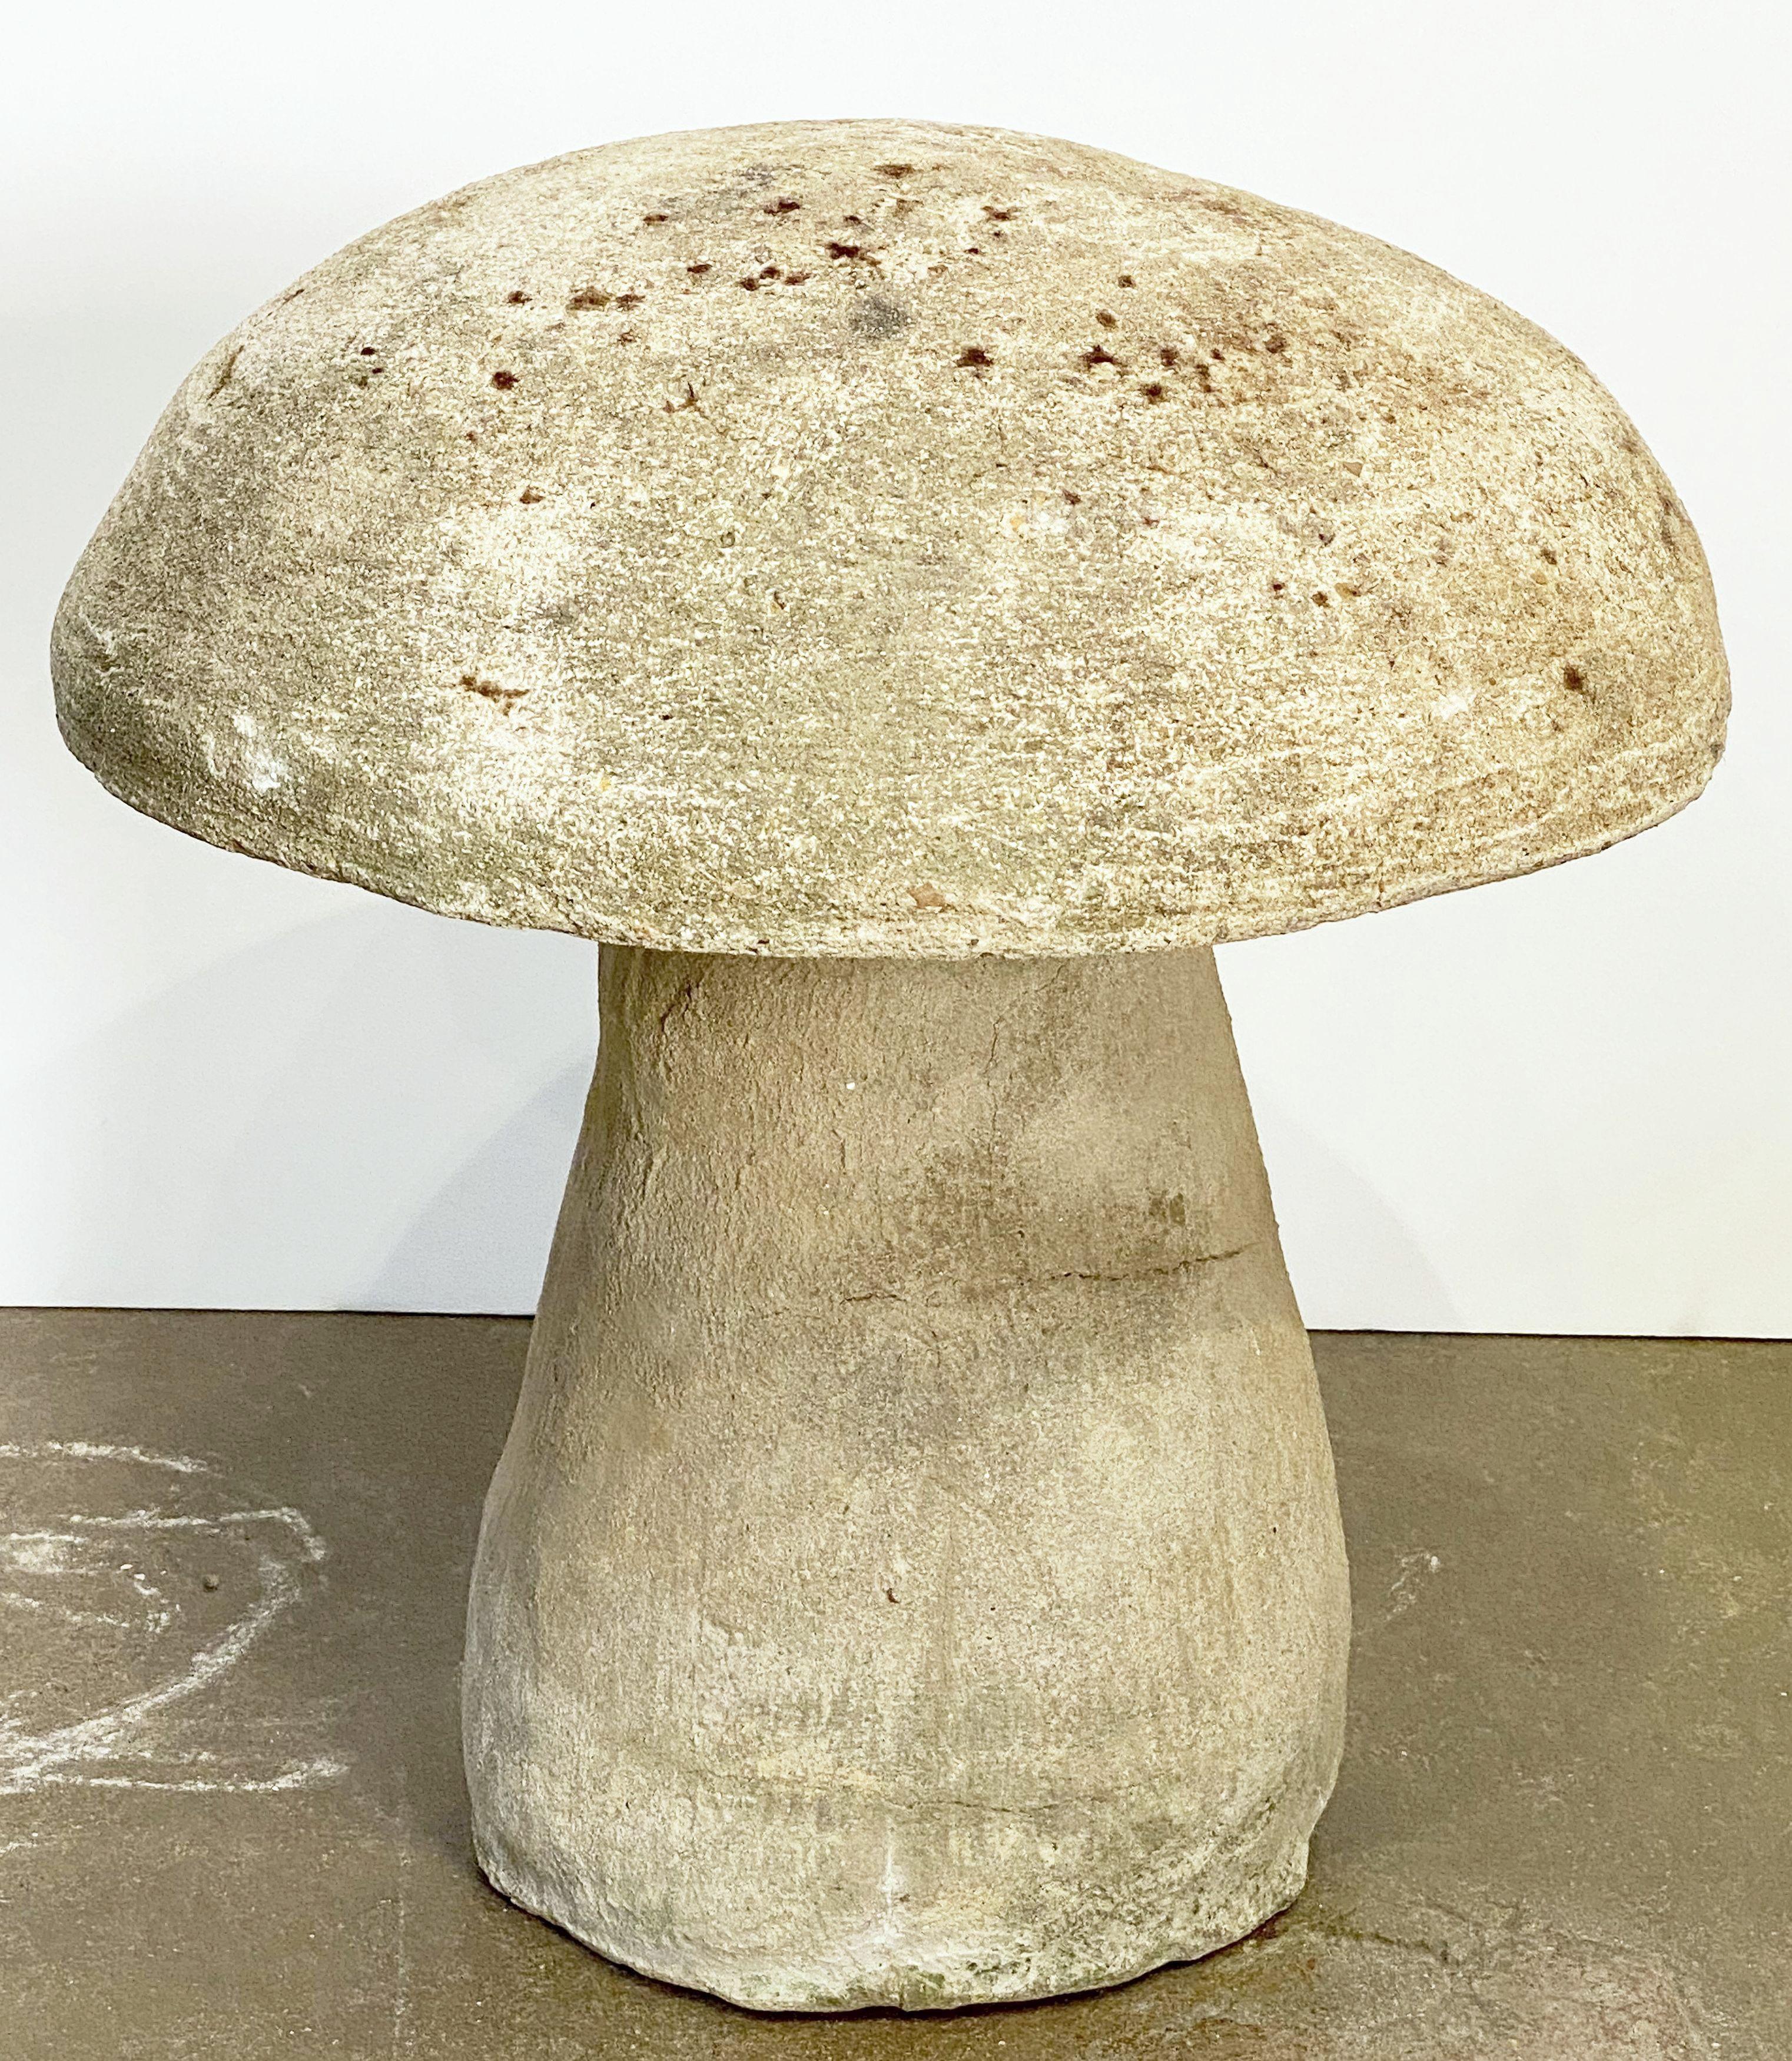 A handsome English garden stone feature of composition stone, featuring a well-modeled toadstool or mushroom (16 1/4 inches height).

With removable top and base for easy shipping. 

Other sizes available.